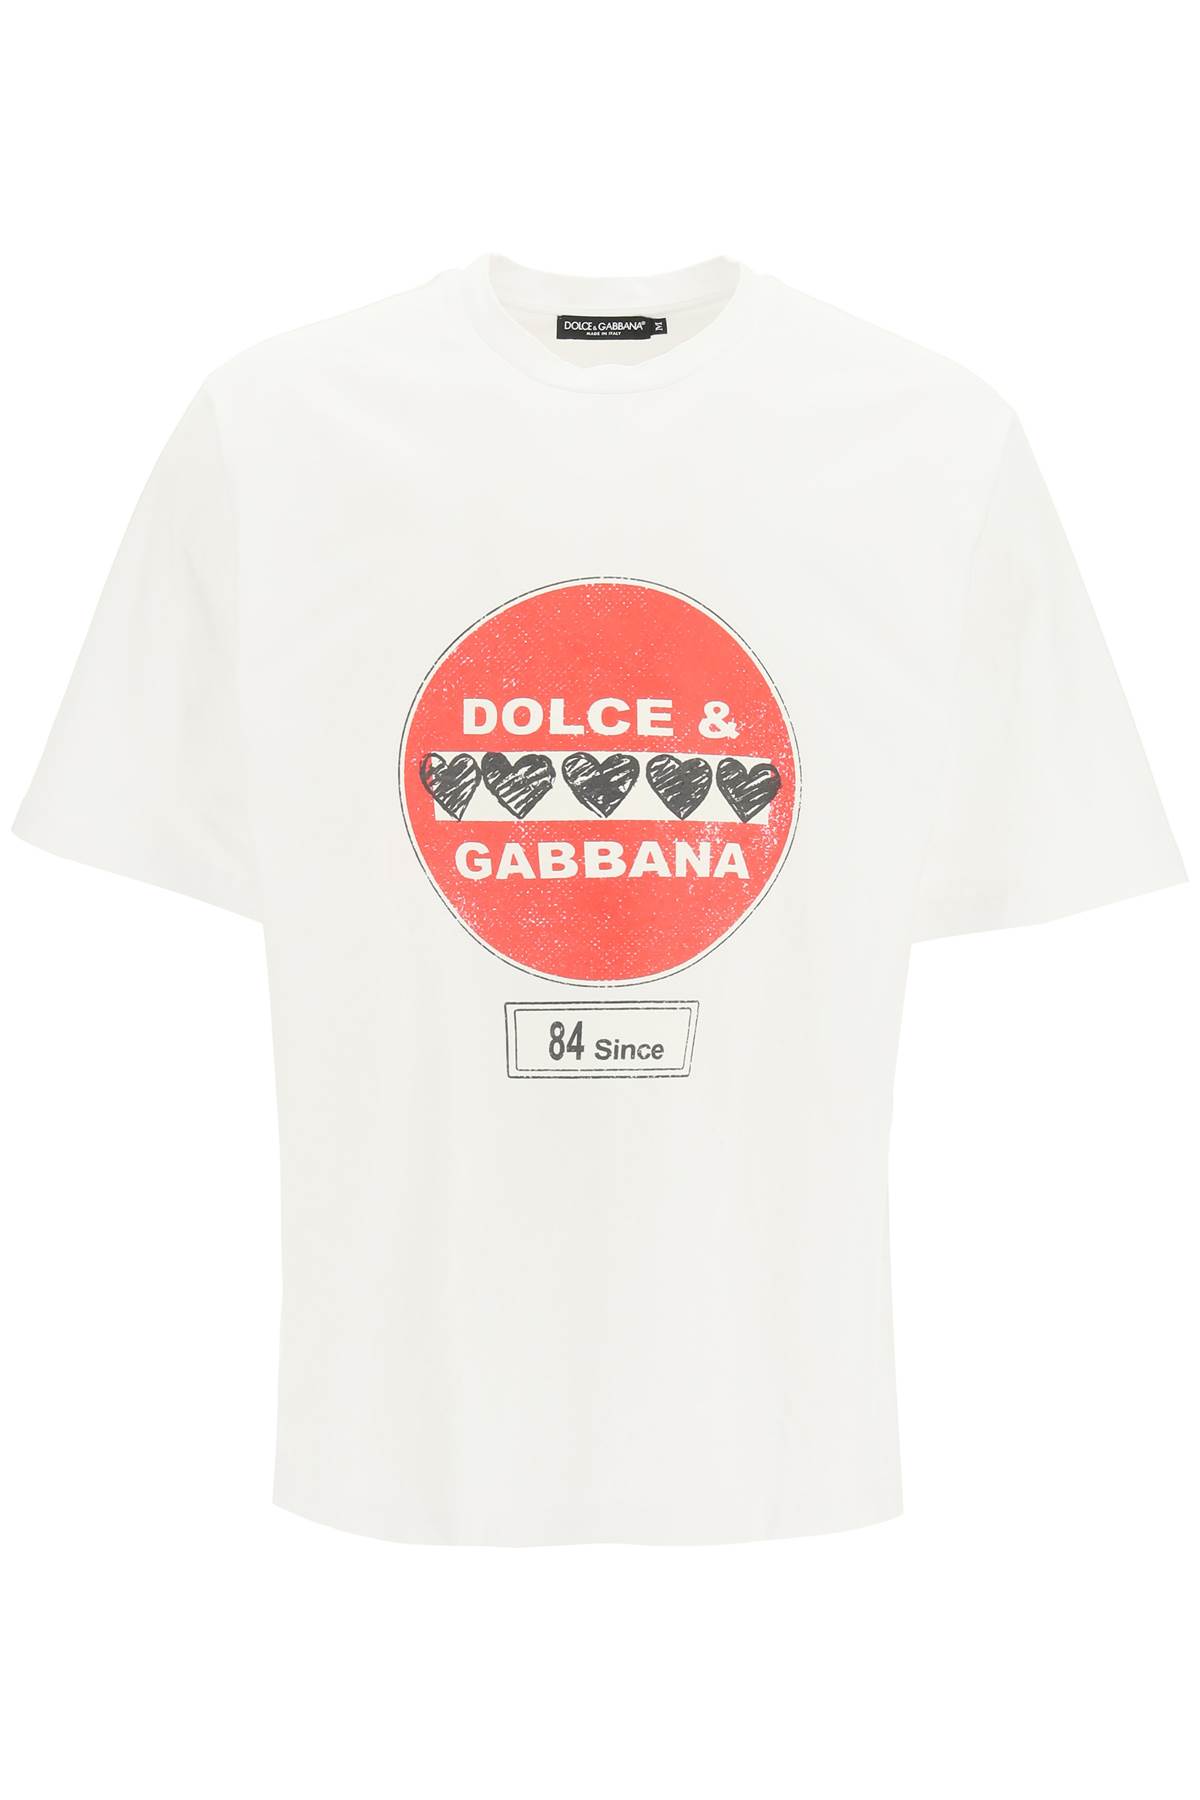 Dolce & Gabbana T-shirt With Road Signs Print